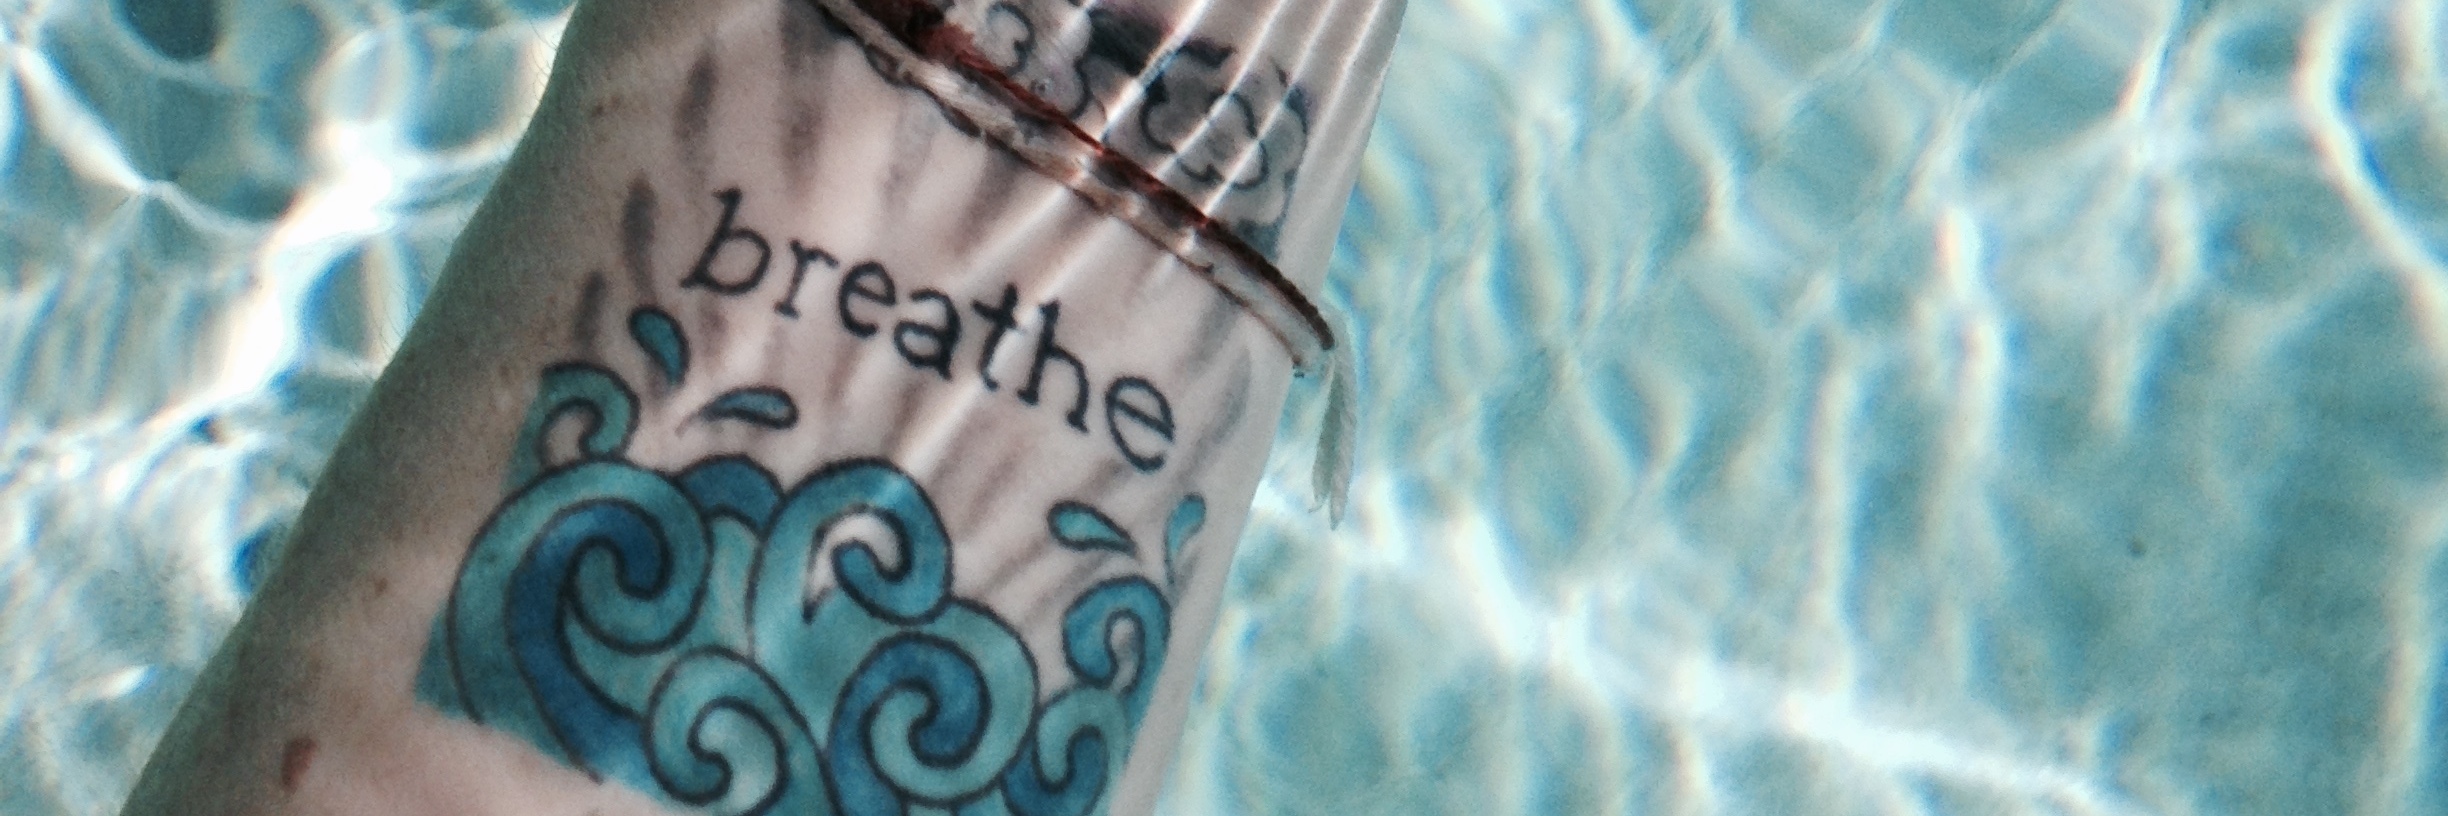 woman's hand under water with a tattoo on her wrist that says 'breathe'